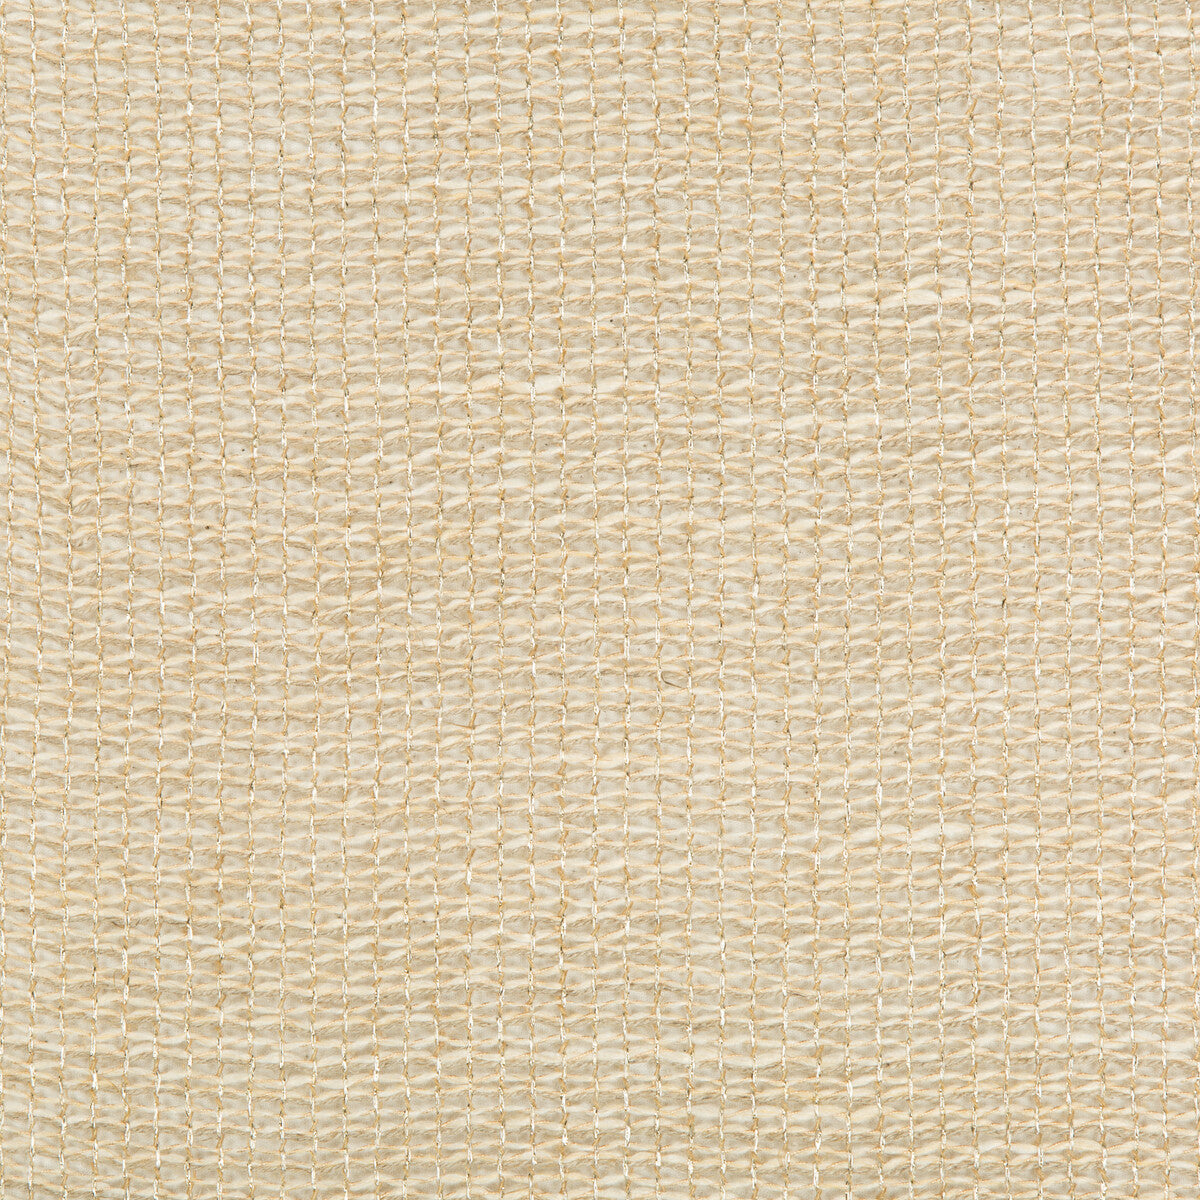 Threadlike fabric in glint color - pattern 4460.416.0 - by Kravet Couture in the Sue Firestone Malibu collection